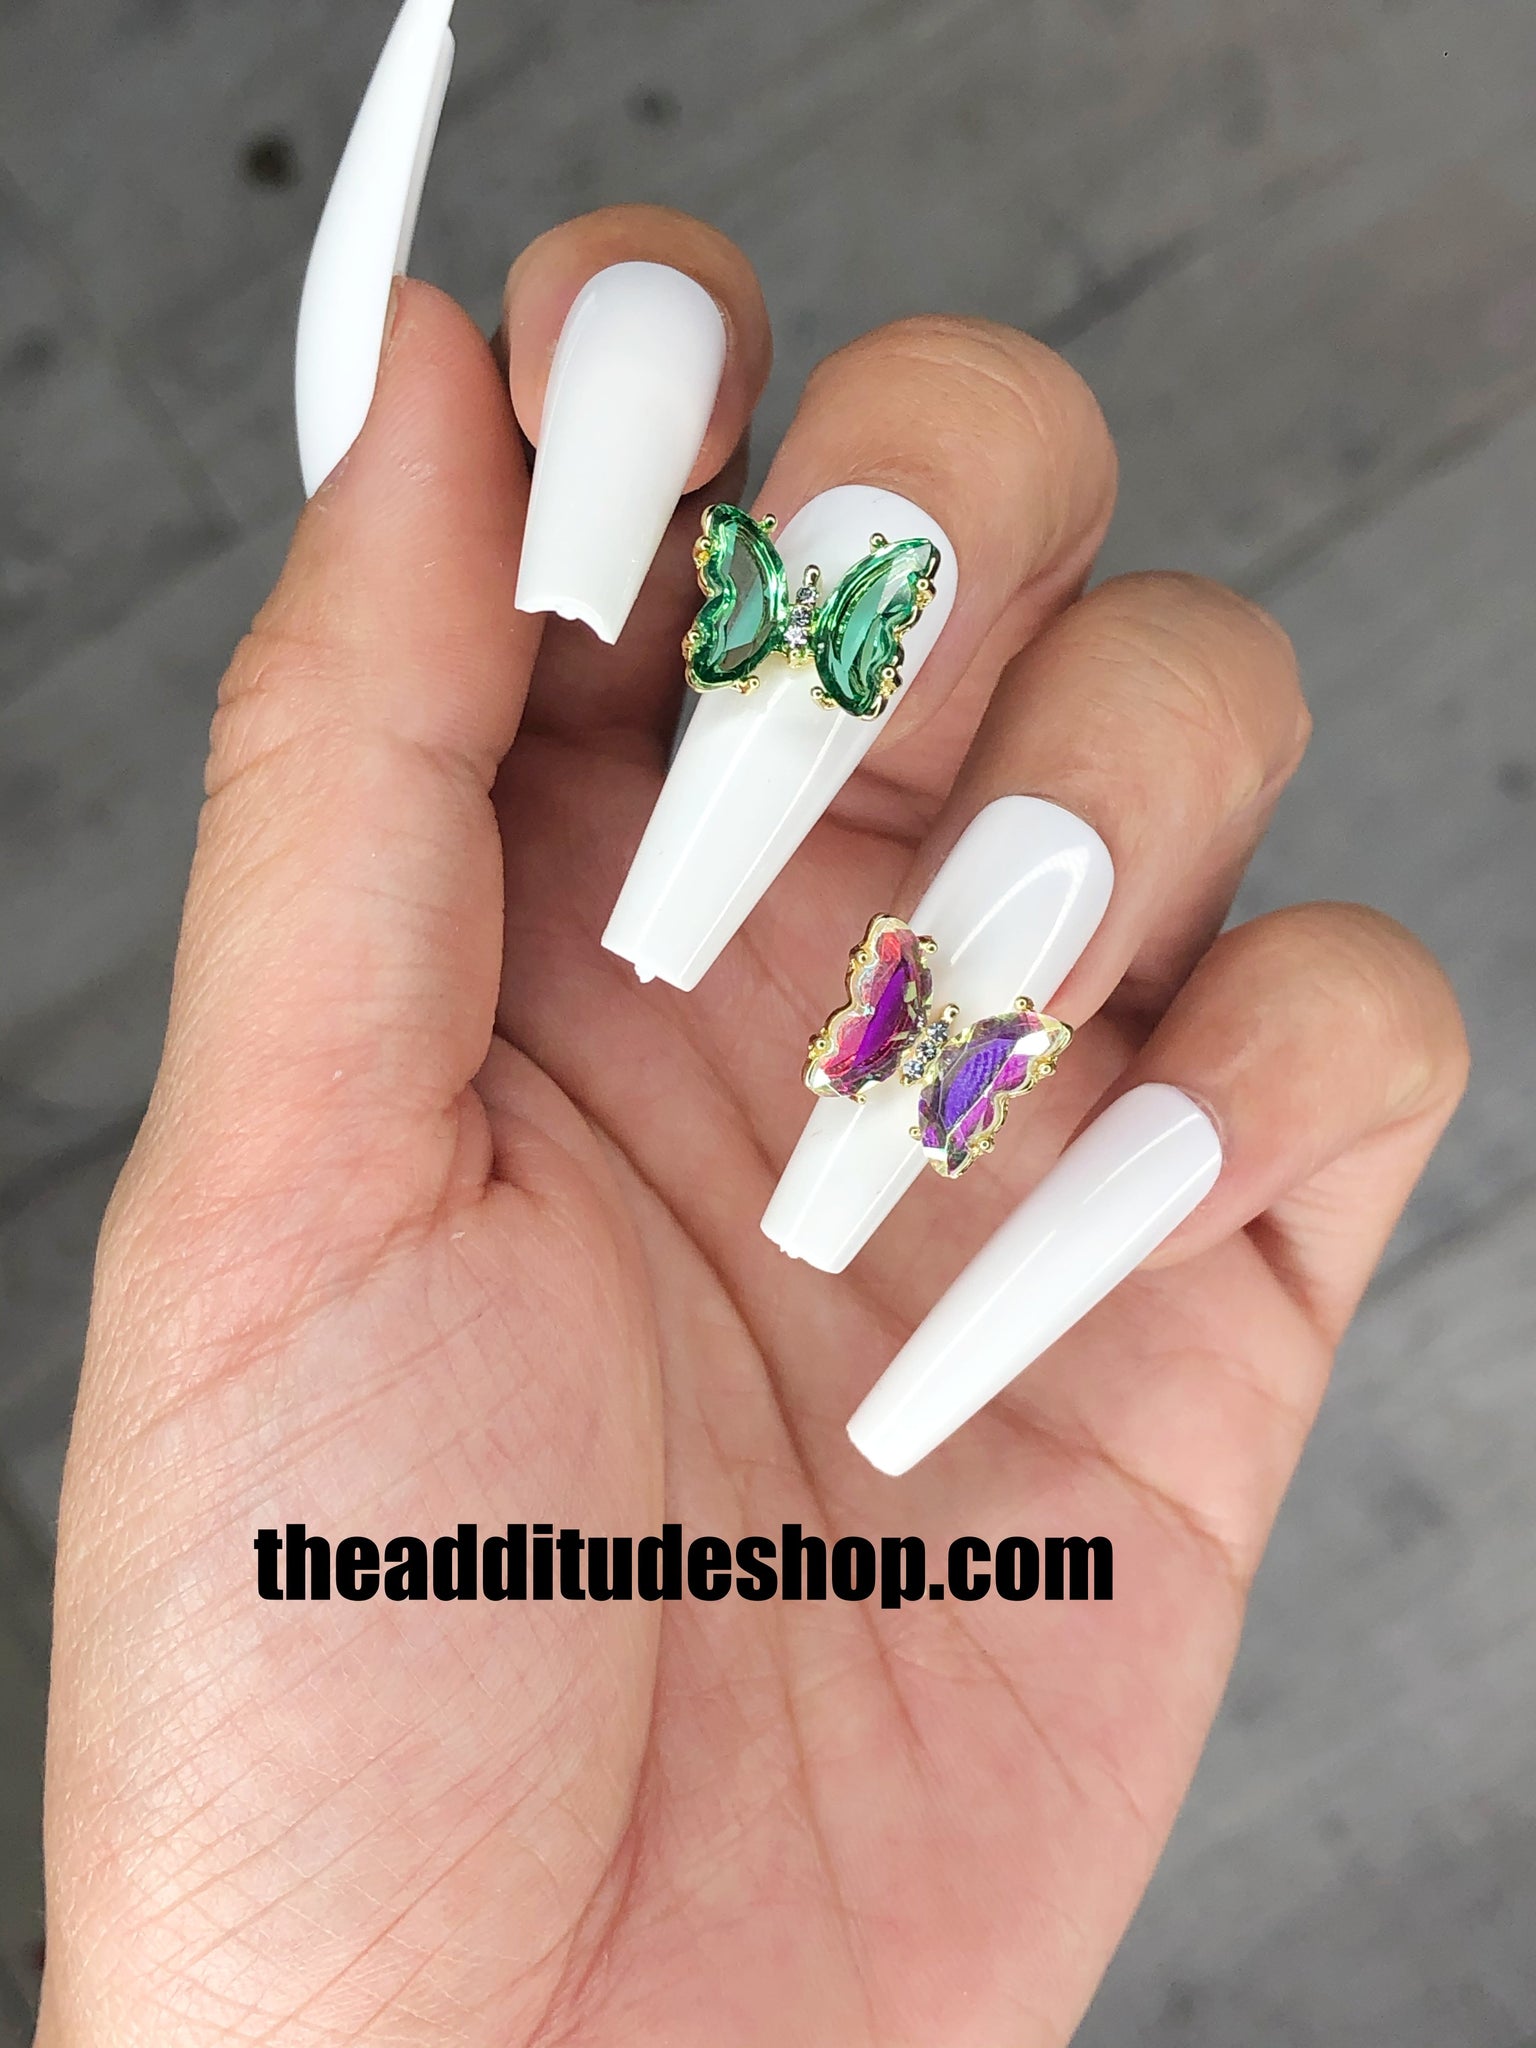 All Products – Tagged Nail Charms– The Additude Shop